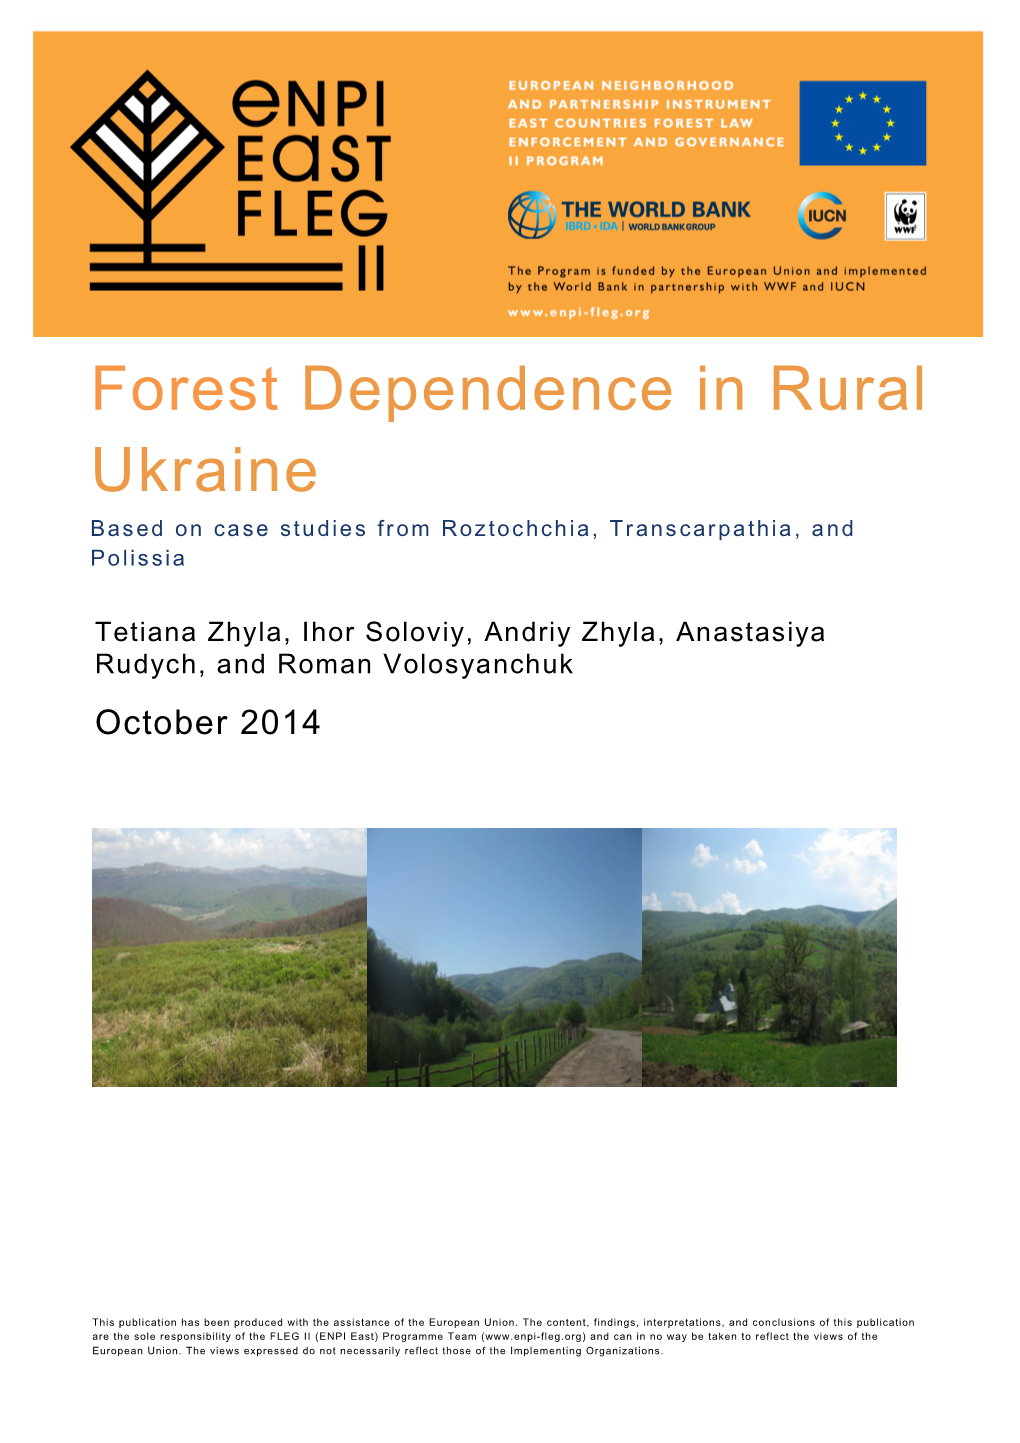 Forest Dependence in Rural Ukraine Based on Case Studies from Roztochchia, Transcarpathia, and Polissia